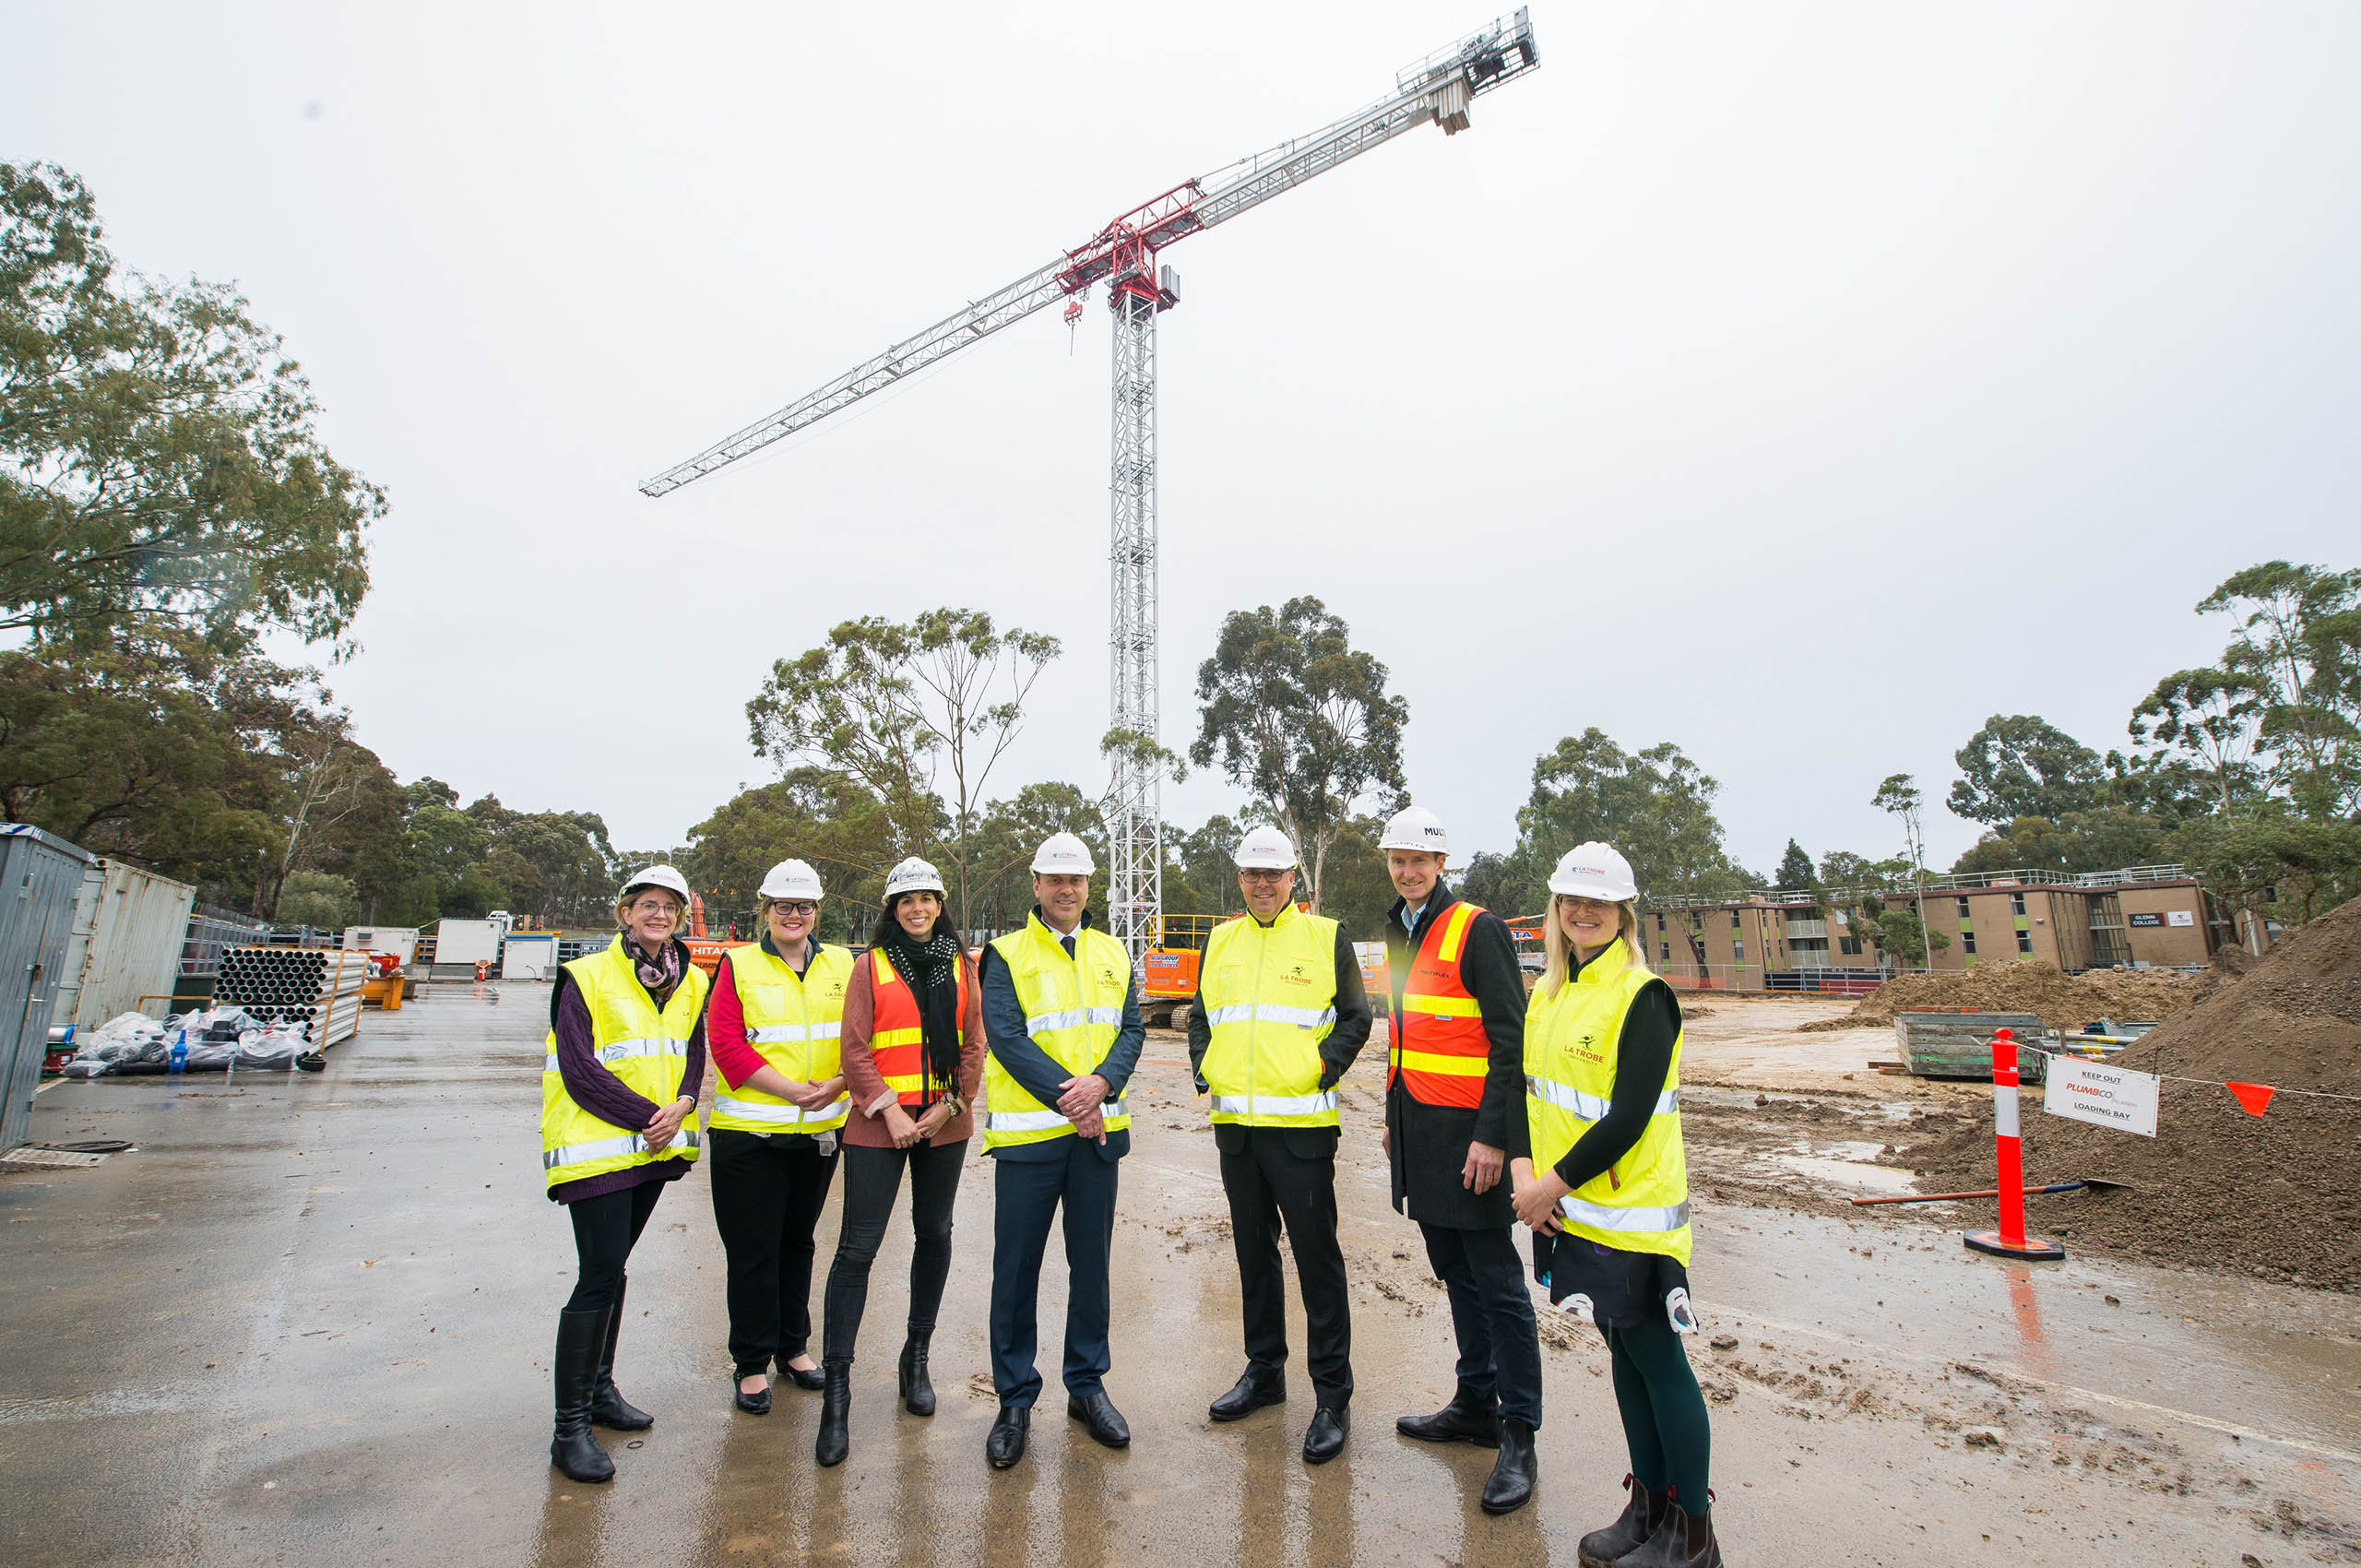 In June 2019, The Honorable Colin Brooks MP was joined by Professor John Dewar, Natalie MacDonald, Susanne Newton and members of the Project team to officially mark the commencement of construction.